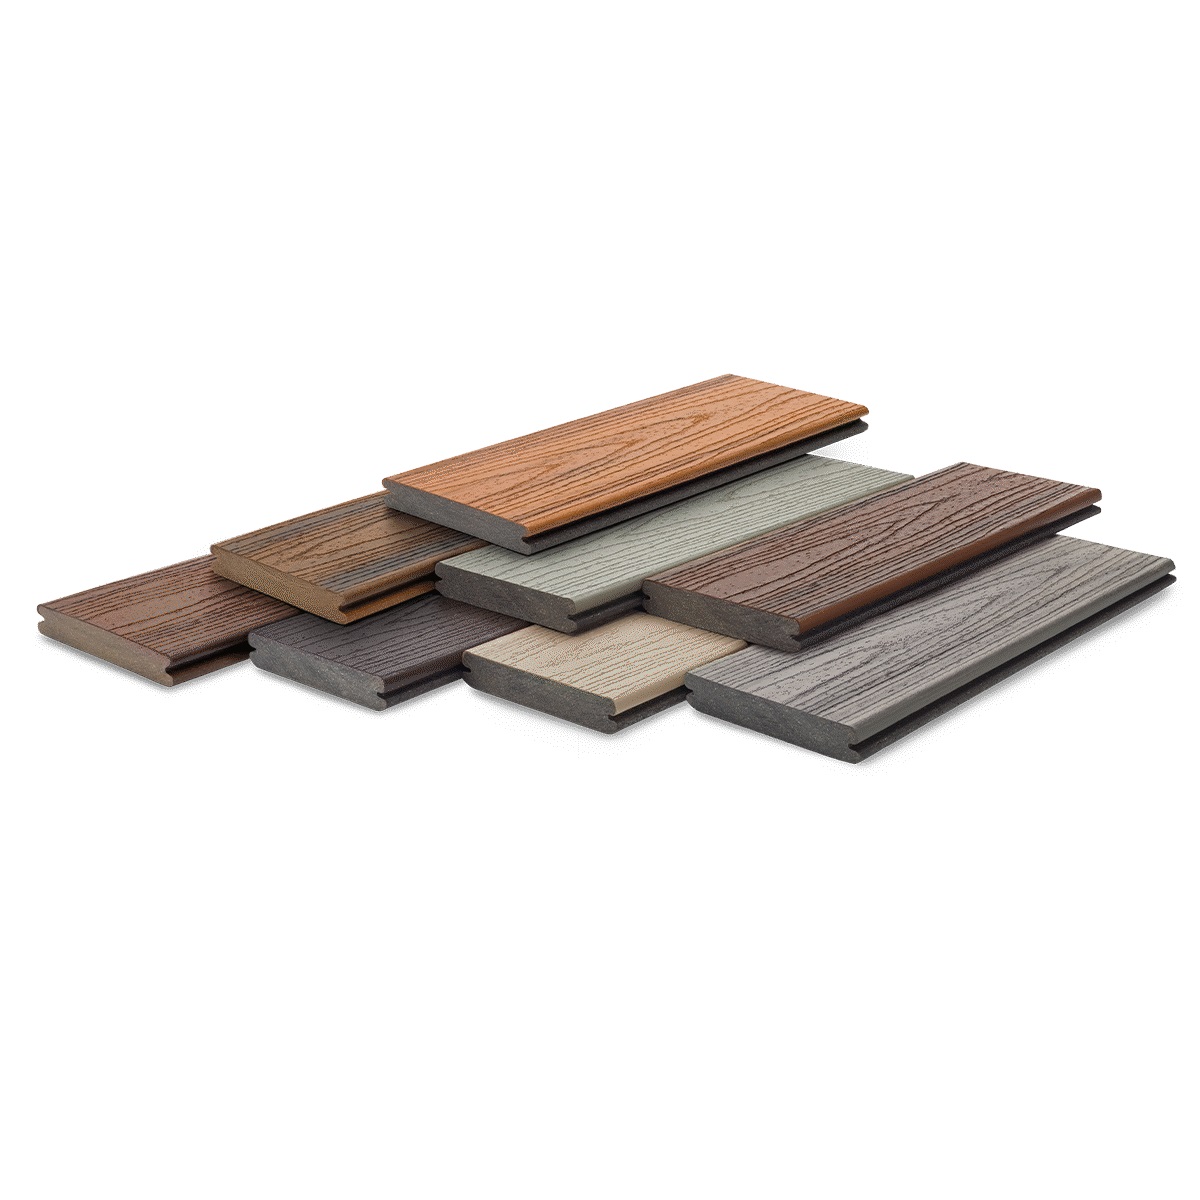 What Lengths Does Trex Decking Come In